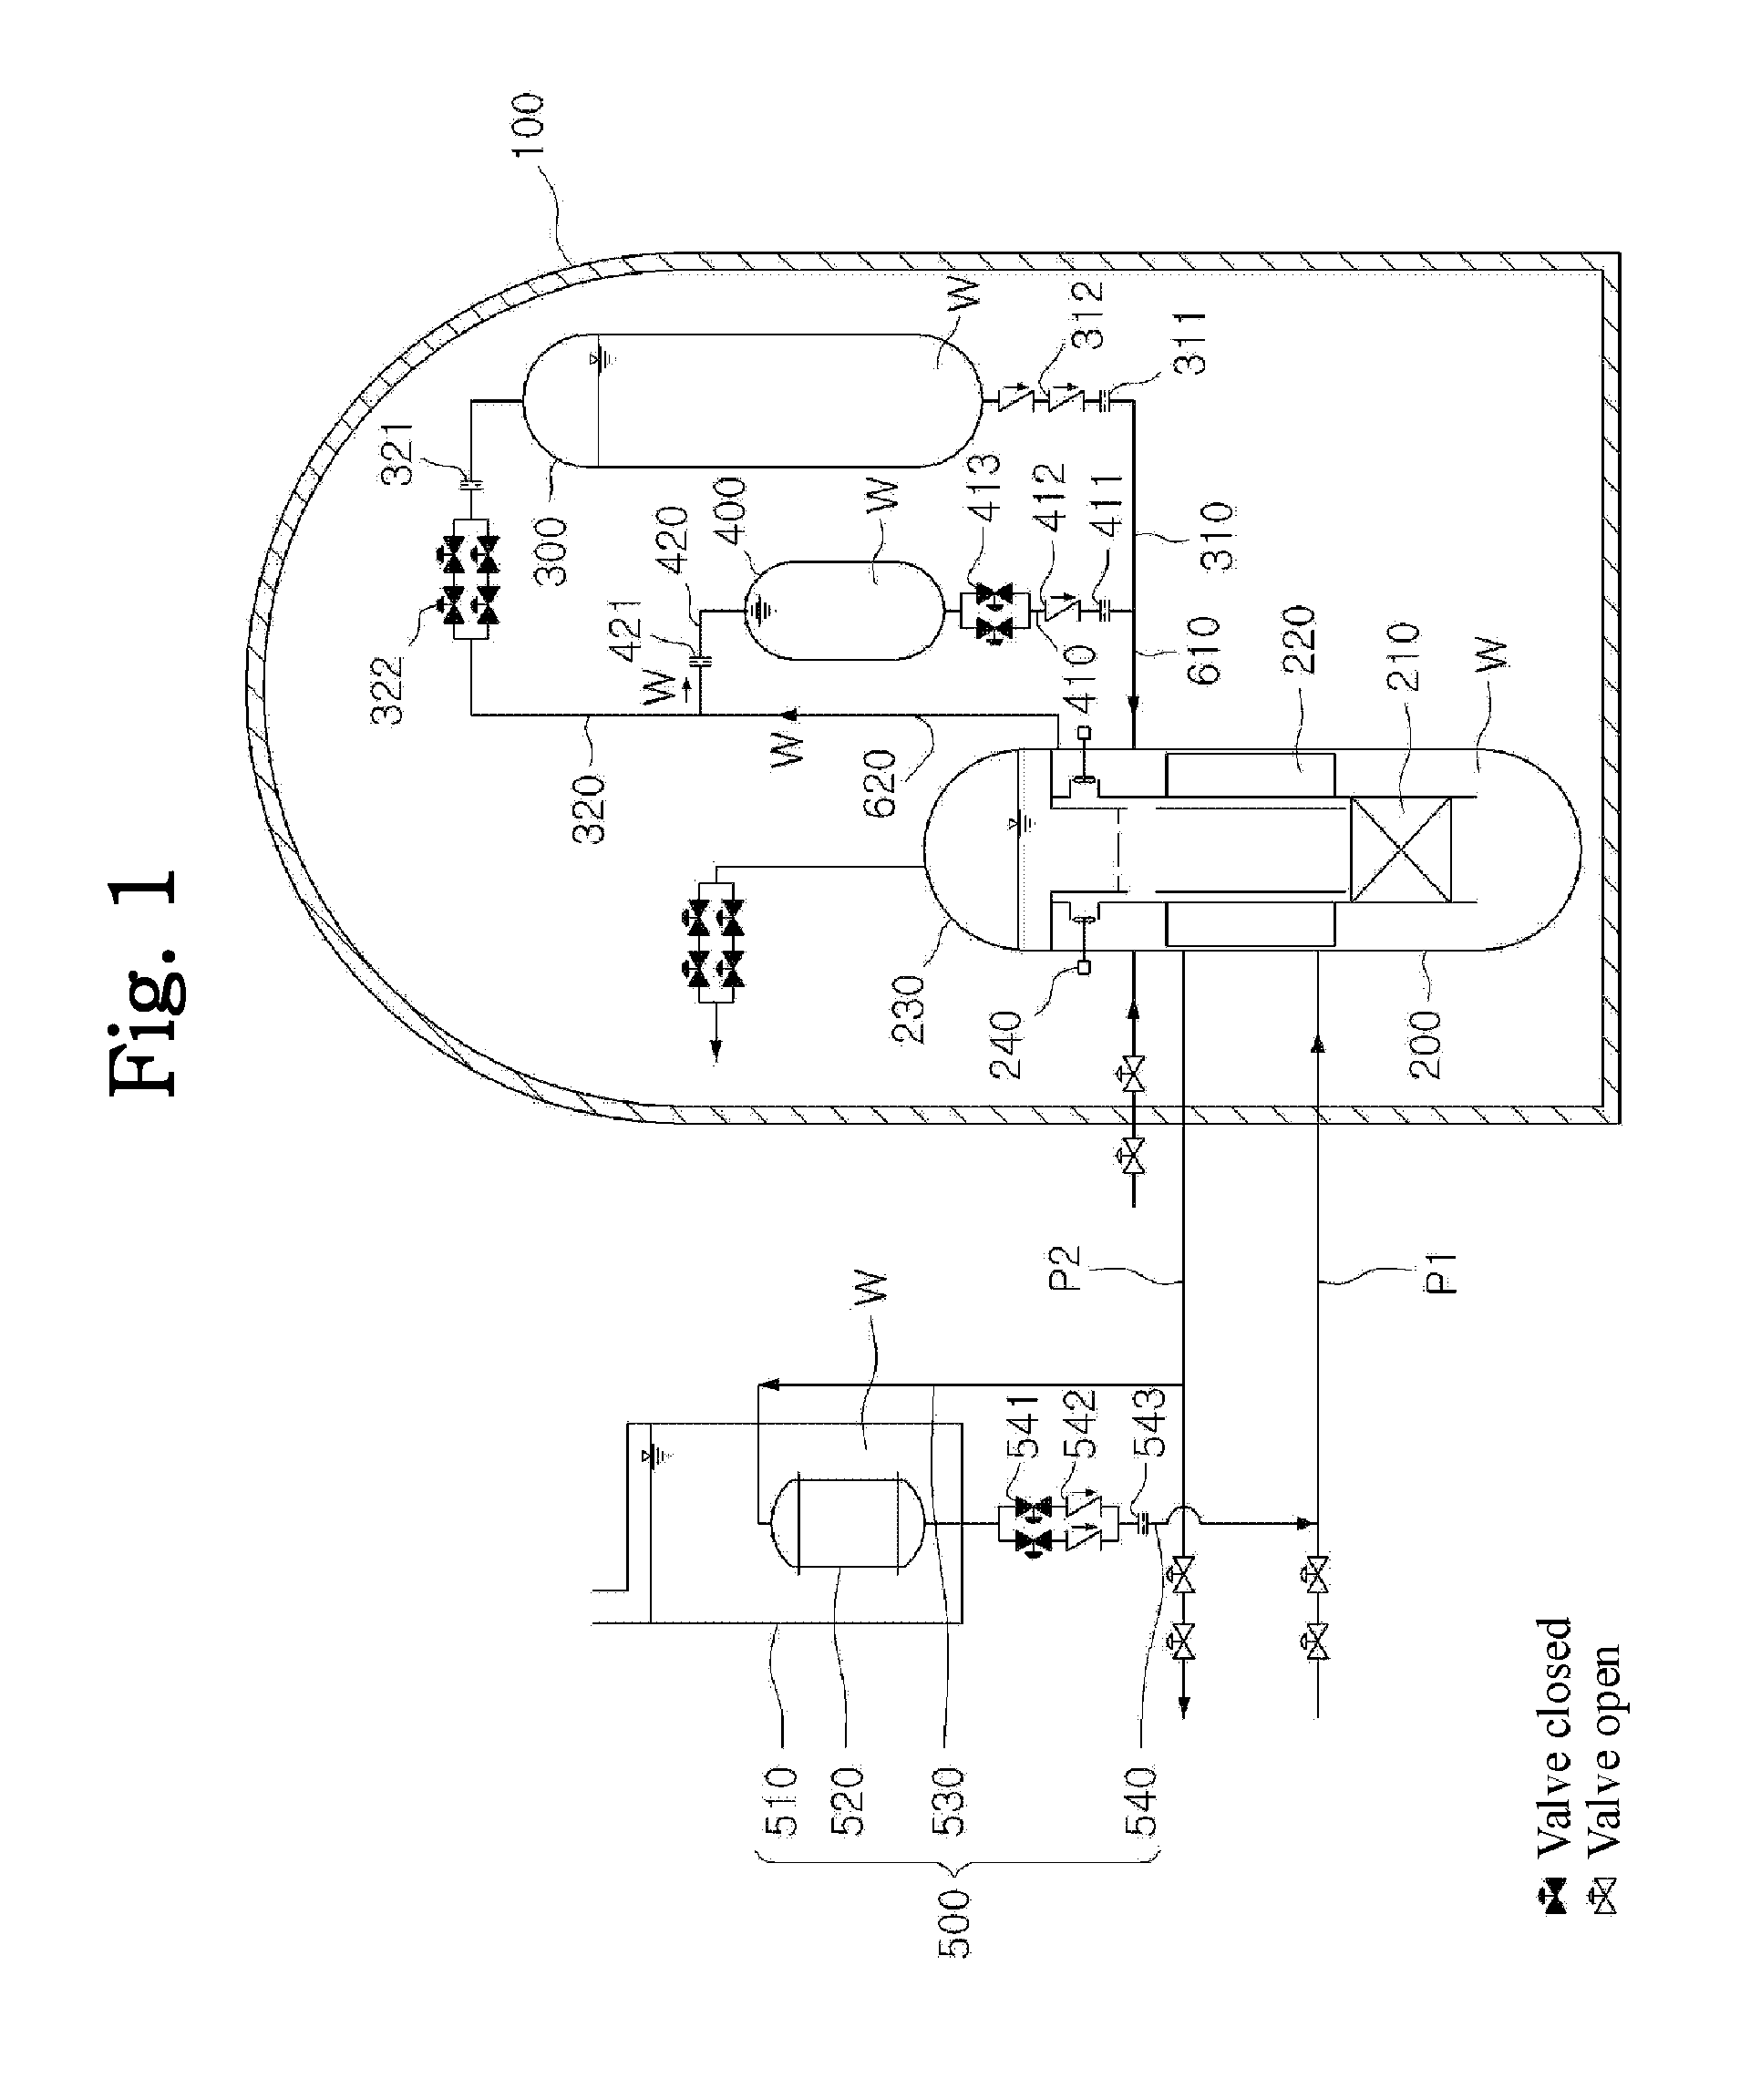 Passive safety system of integral reactor